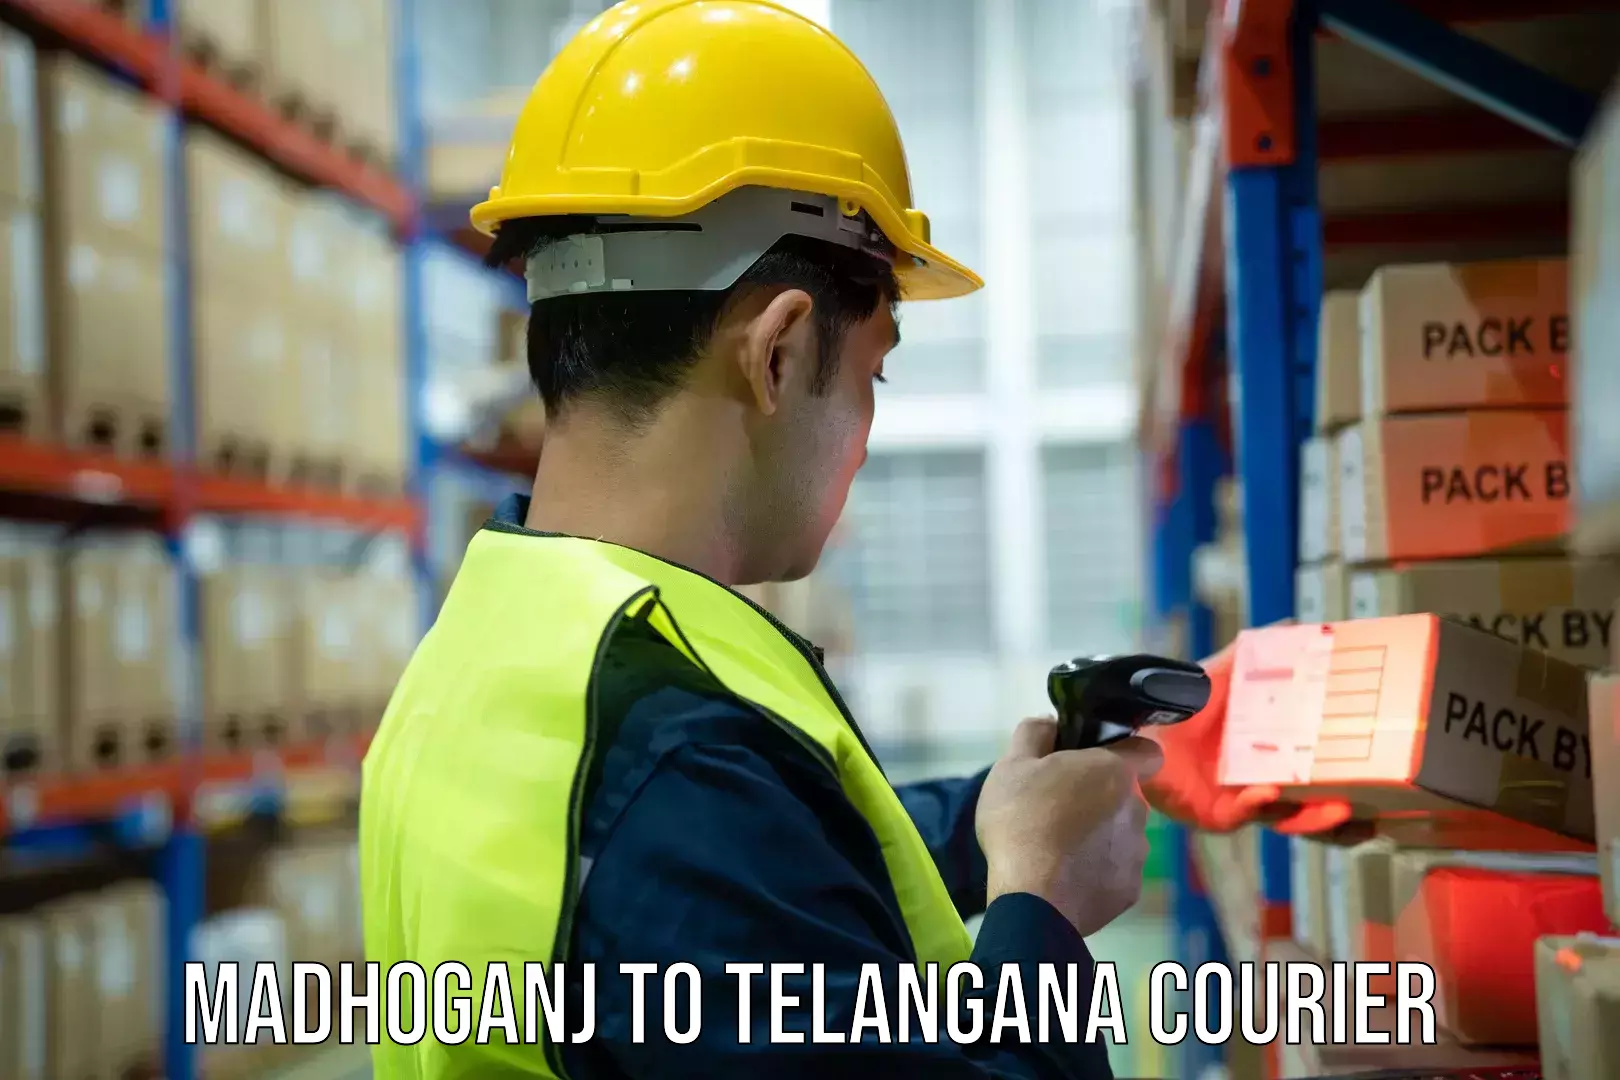 Flexible delivery schedules Madhoganj to Narayanpet